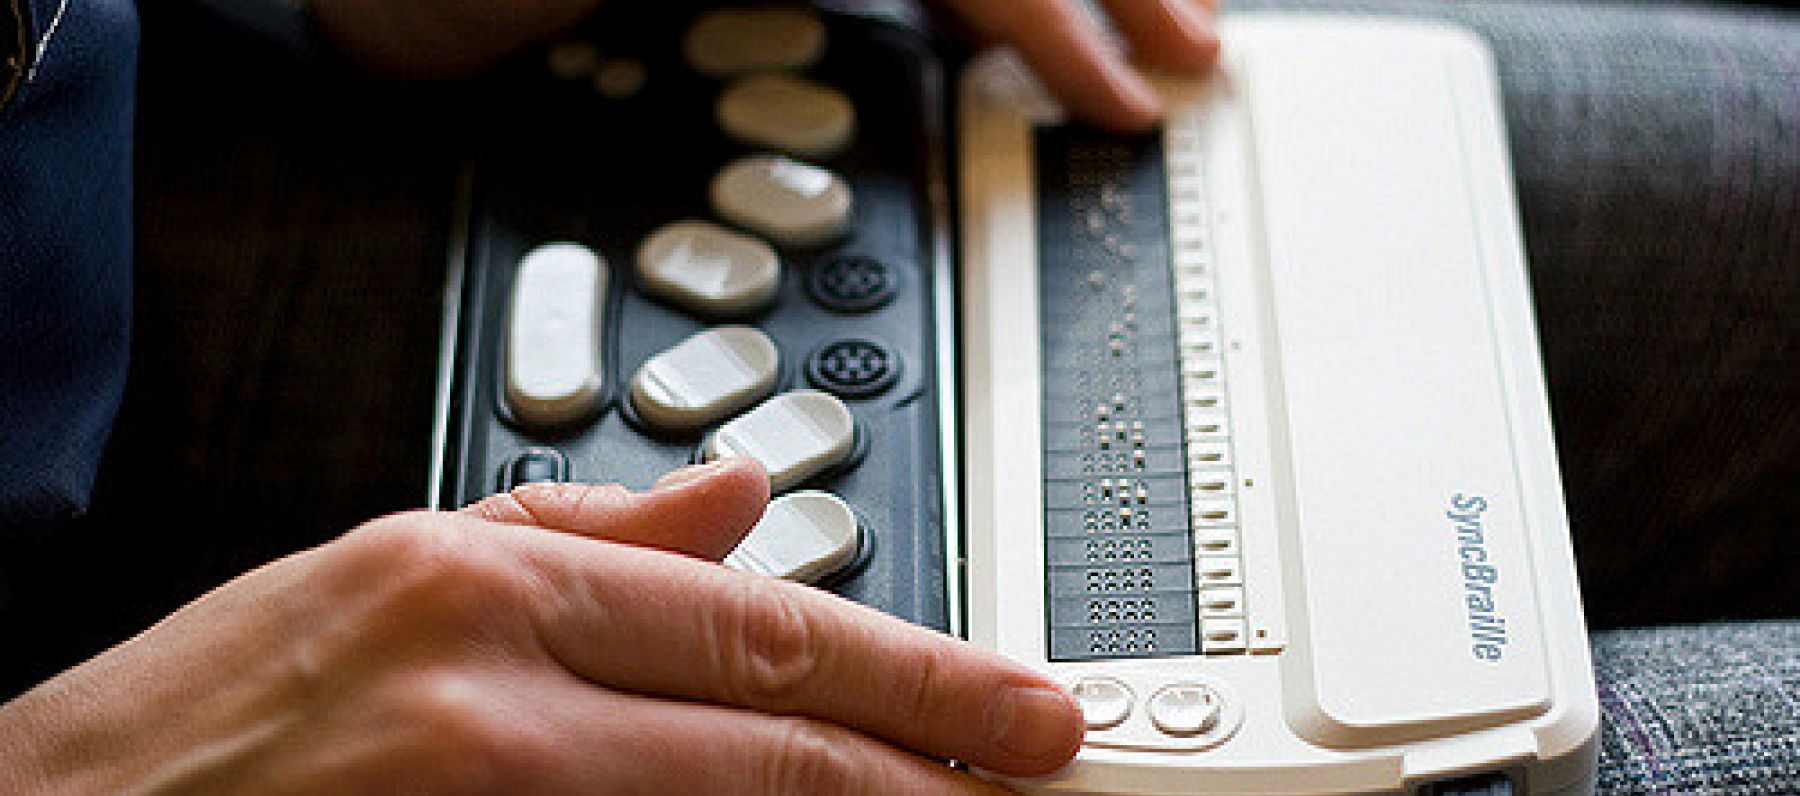 A refreshable braille display